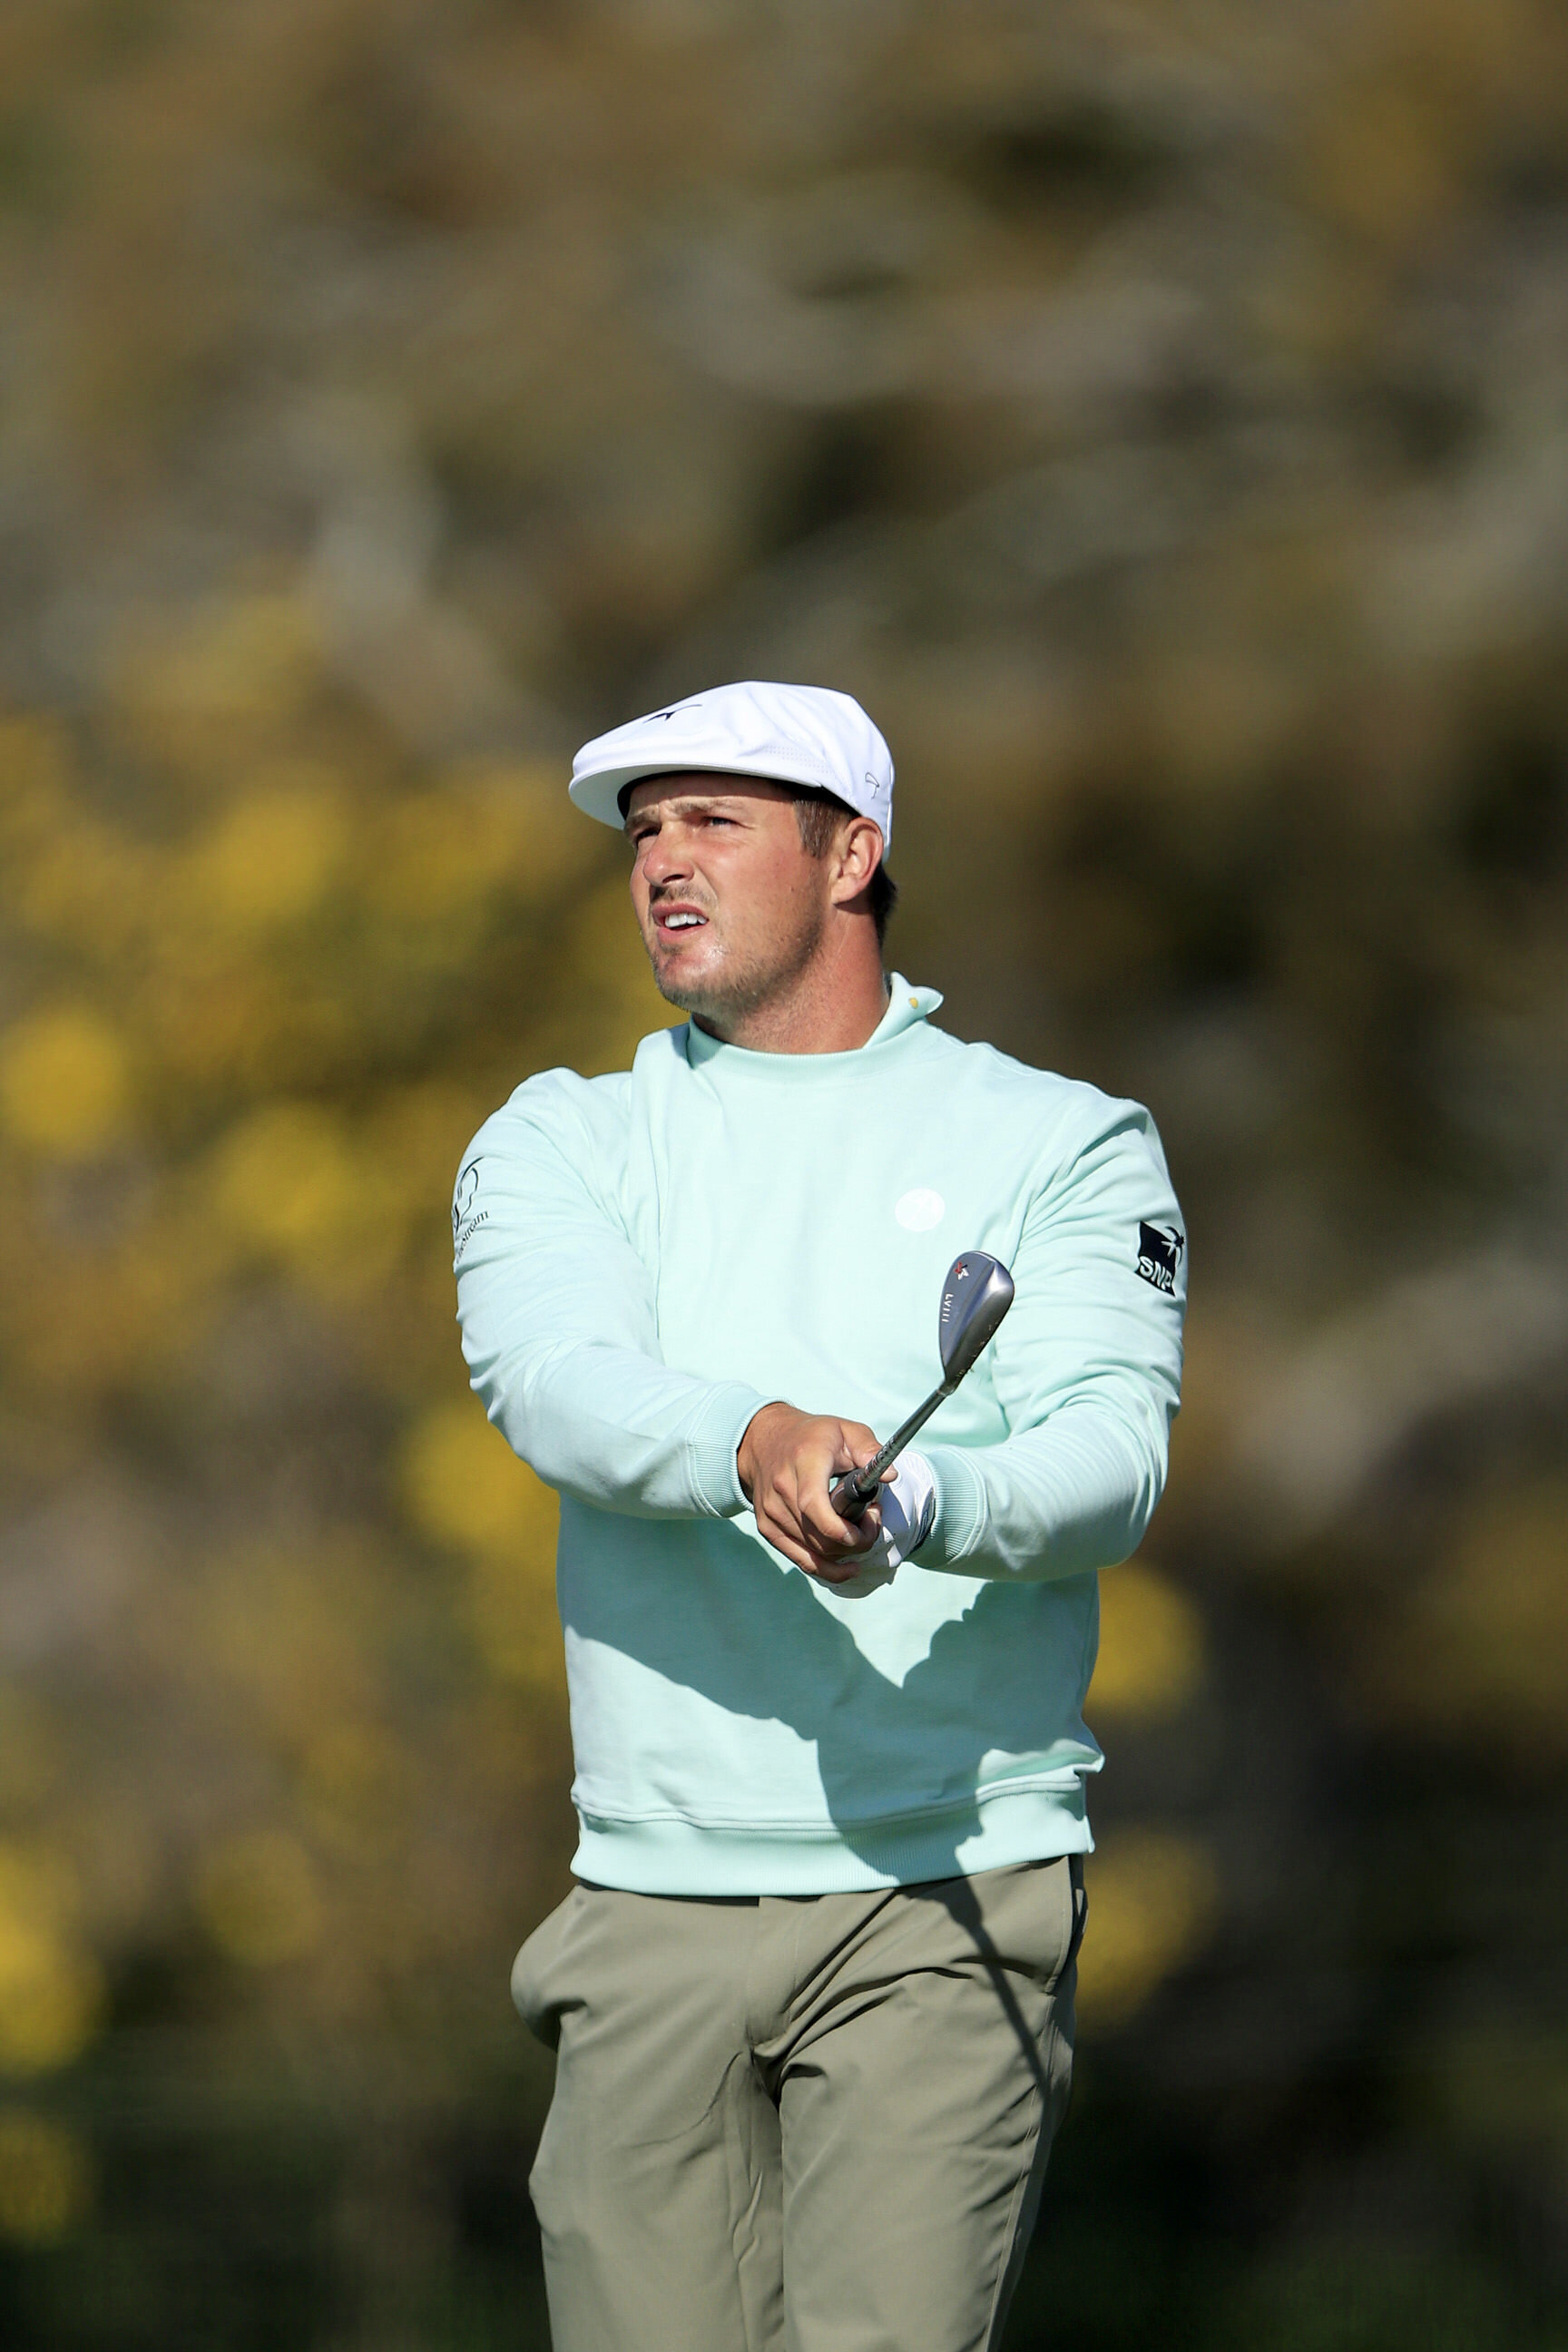  ORLANDO, FLORIDA - MARCH 04: Bryson DeChambeau of the United States plays a shot on the 13th fairwayduring the first round of the Arnold Palmer Invitational Presented by MasterCard at the Bay Hill Club and Lodge on March 04, 2021 in Orlando, Florida